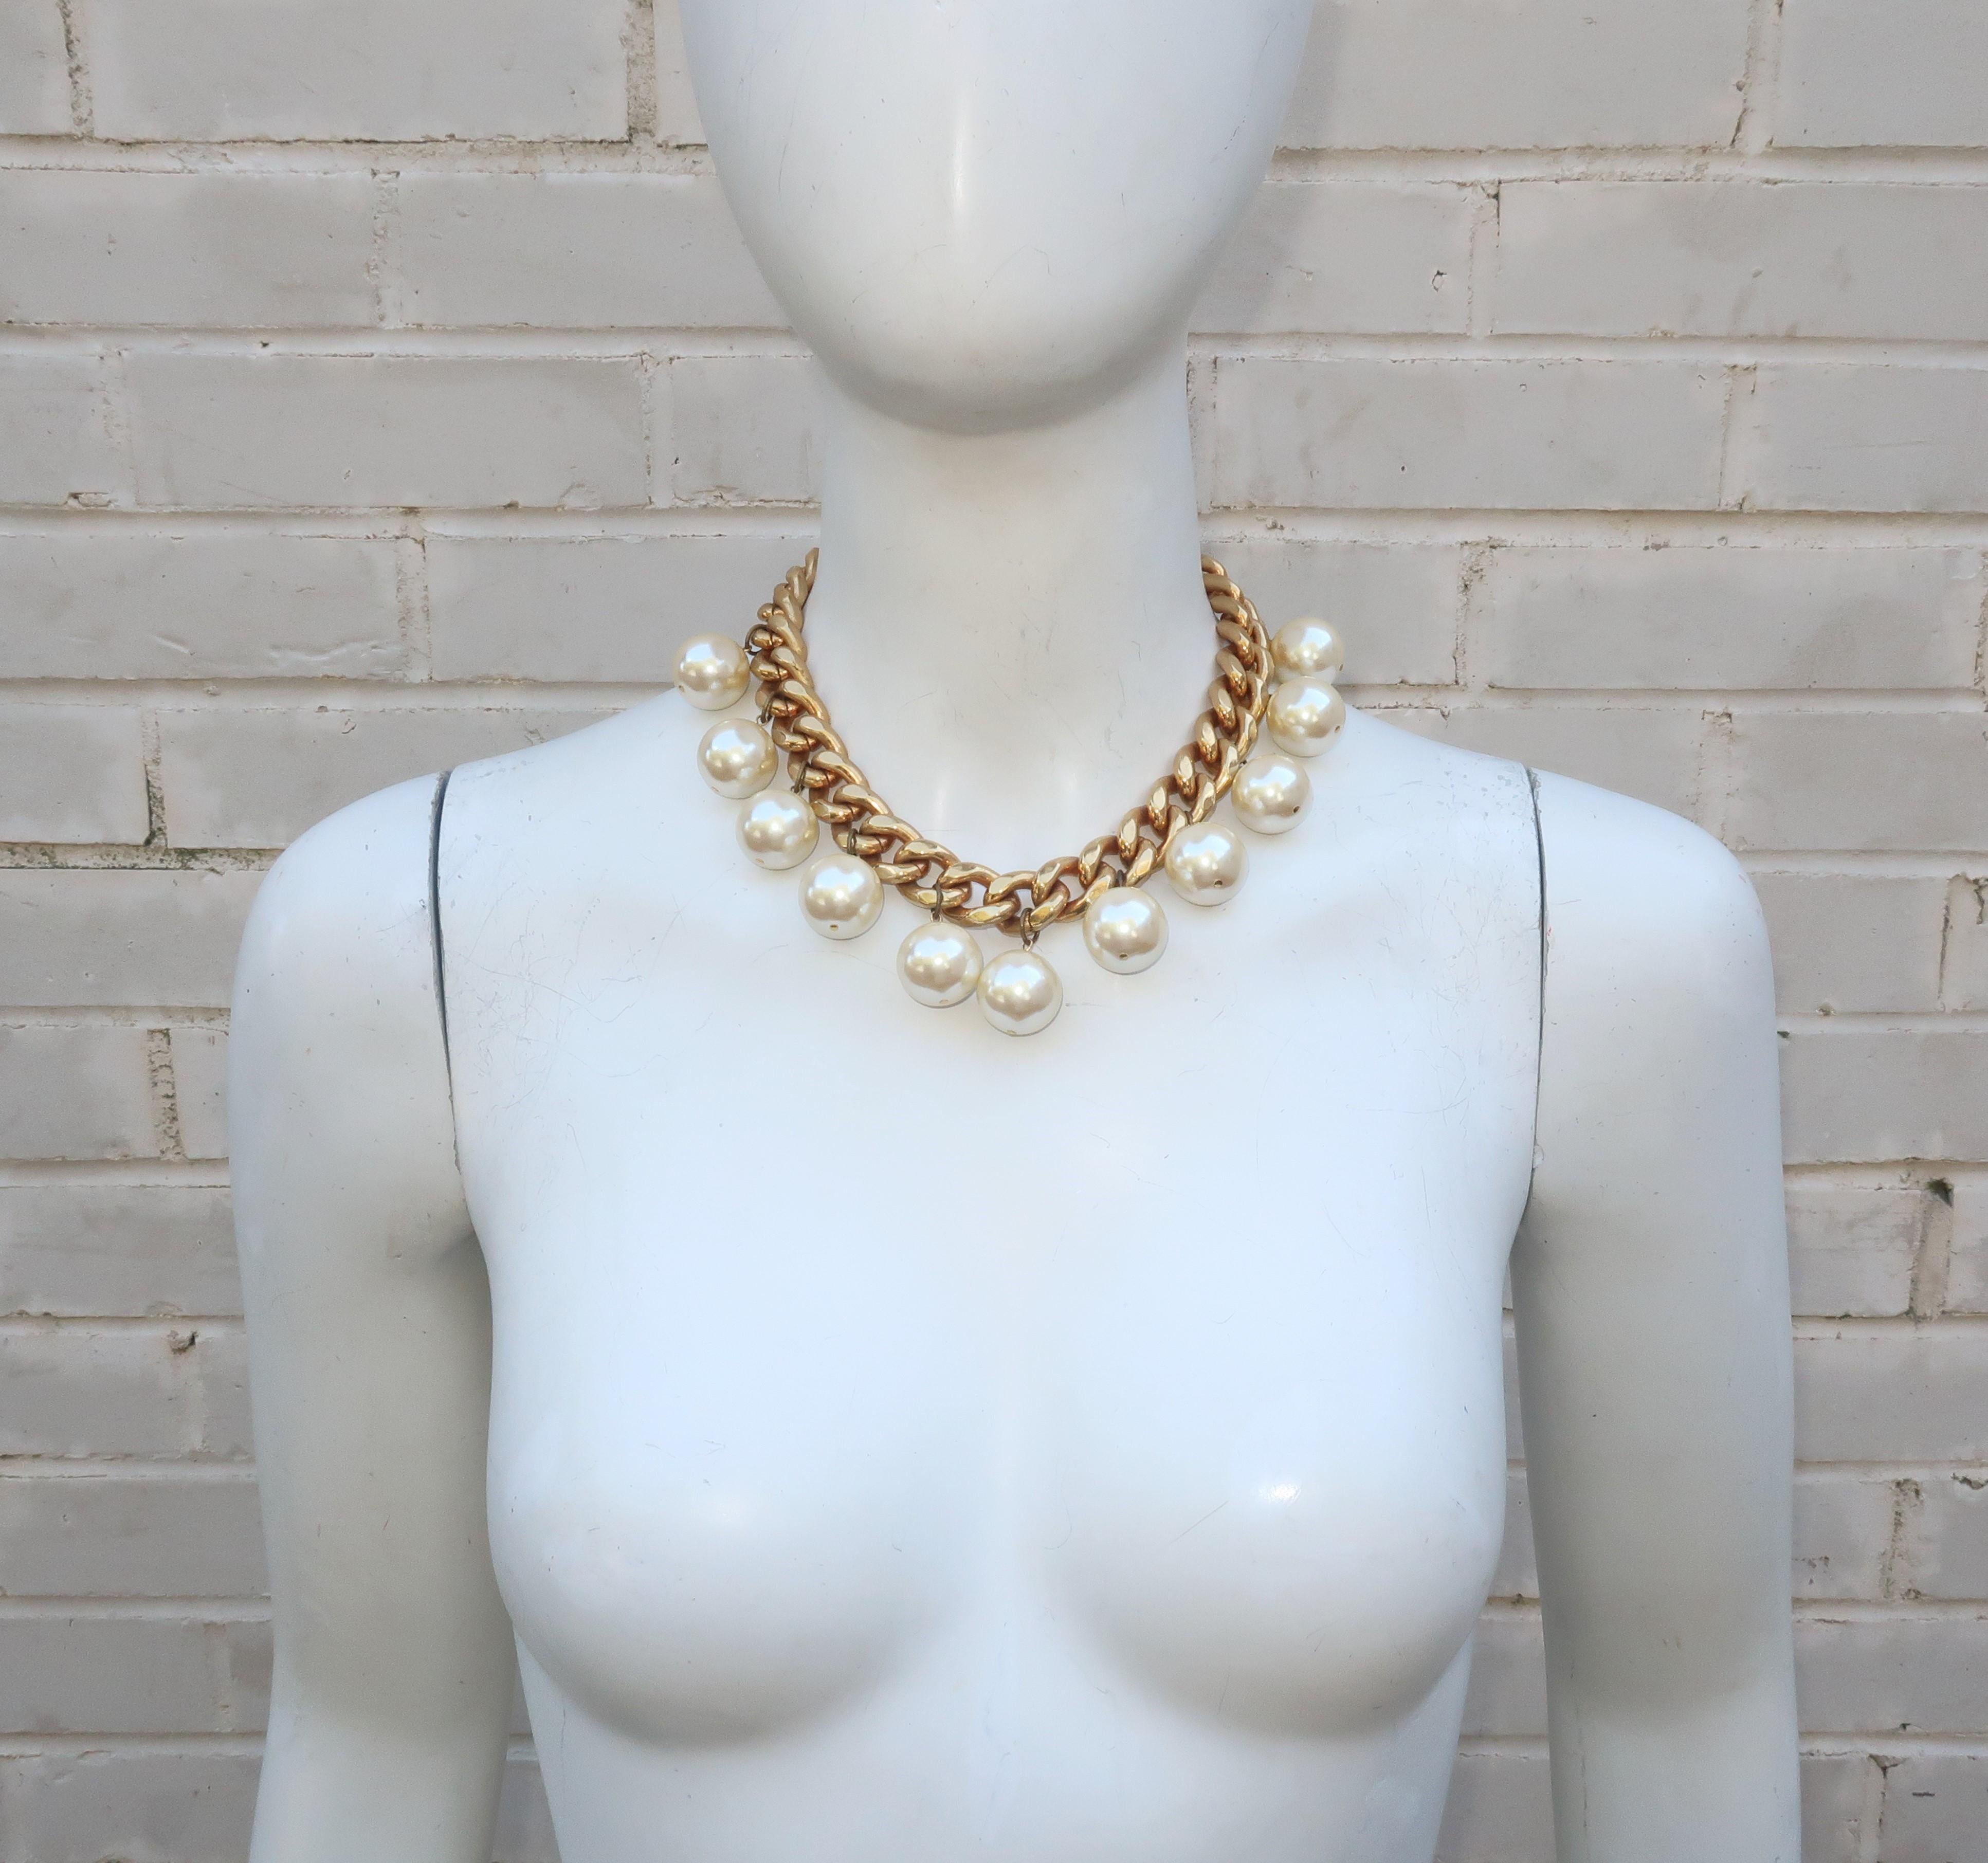 Carolee has been a trendsetting costume jewelry company since the 1970’s.  This 1980's chunky chain necklace is a short choker style length with large pearl dangles that put the charm in charming.  It securely fits with an easy toggle closure.  The